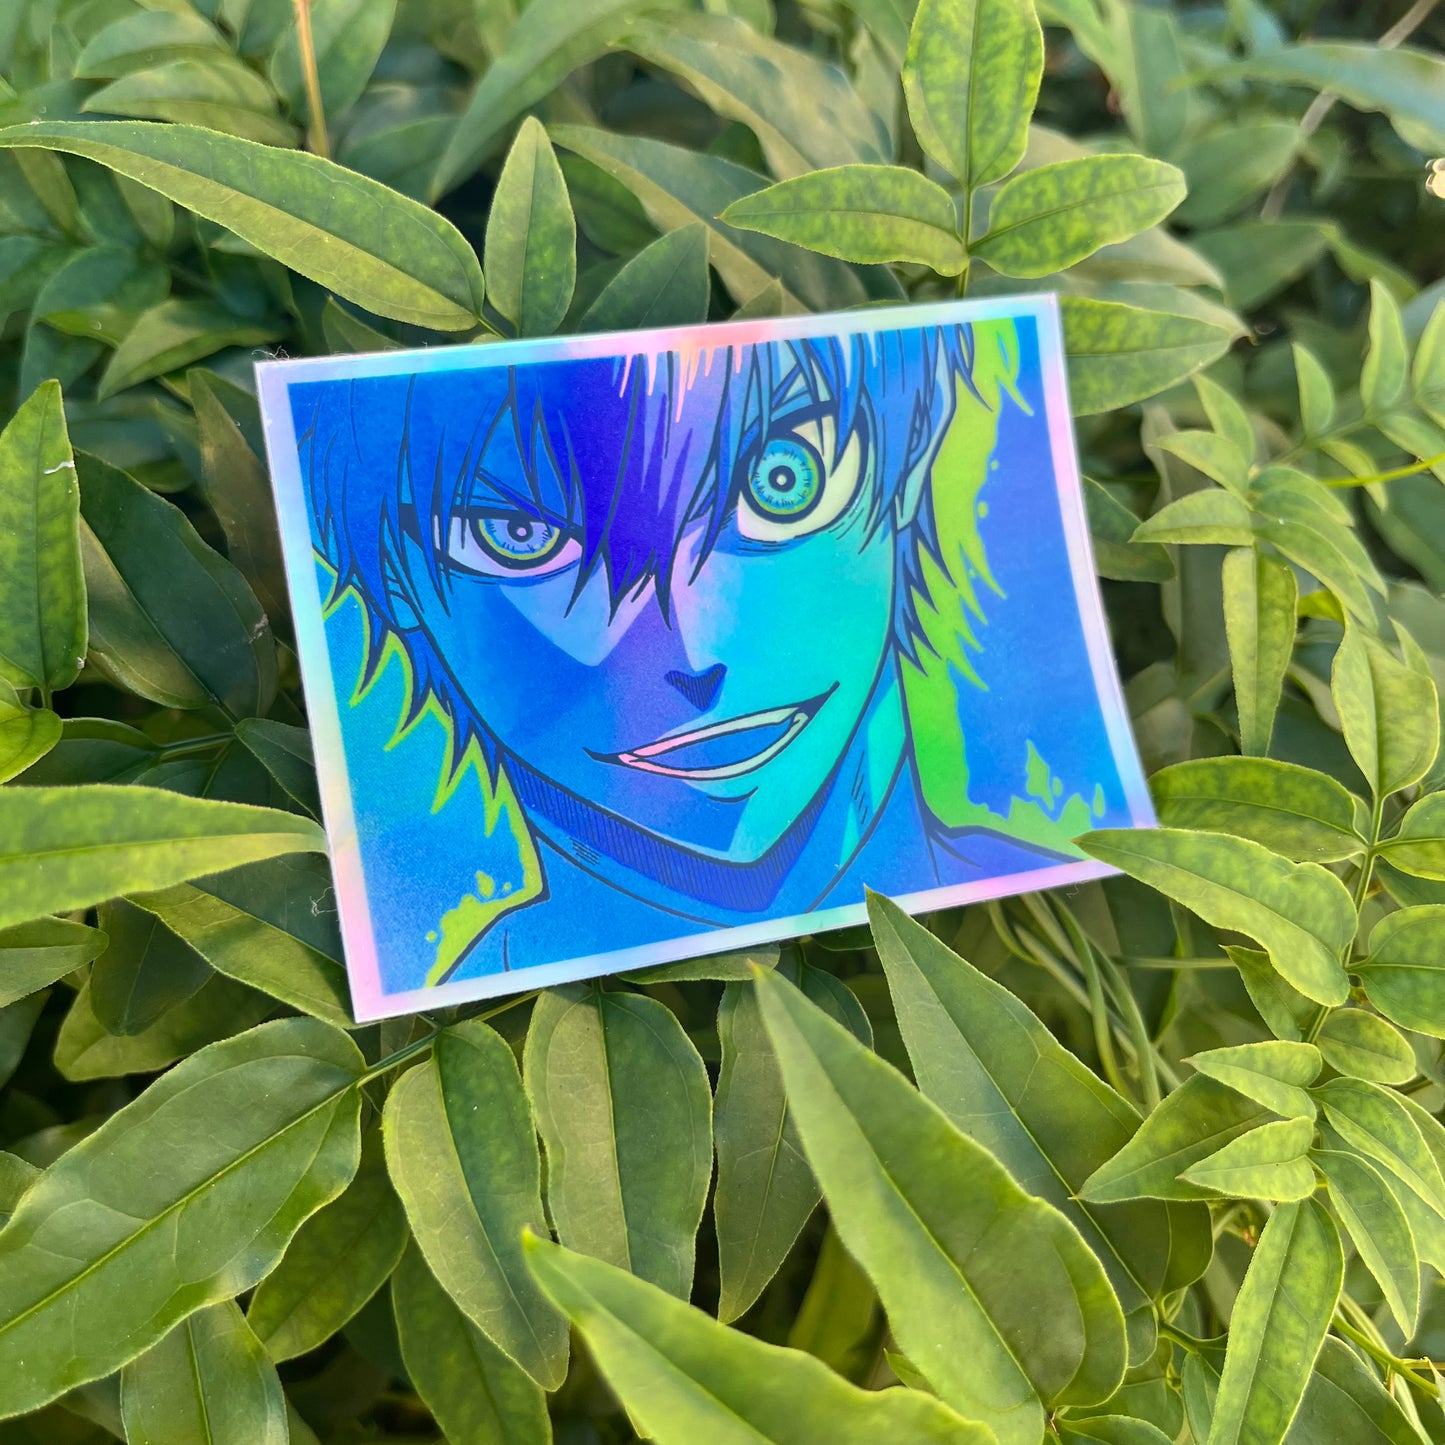 ‘Thinking in Green’ Holographic Sticker